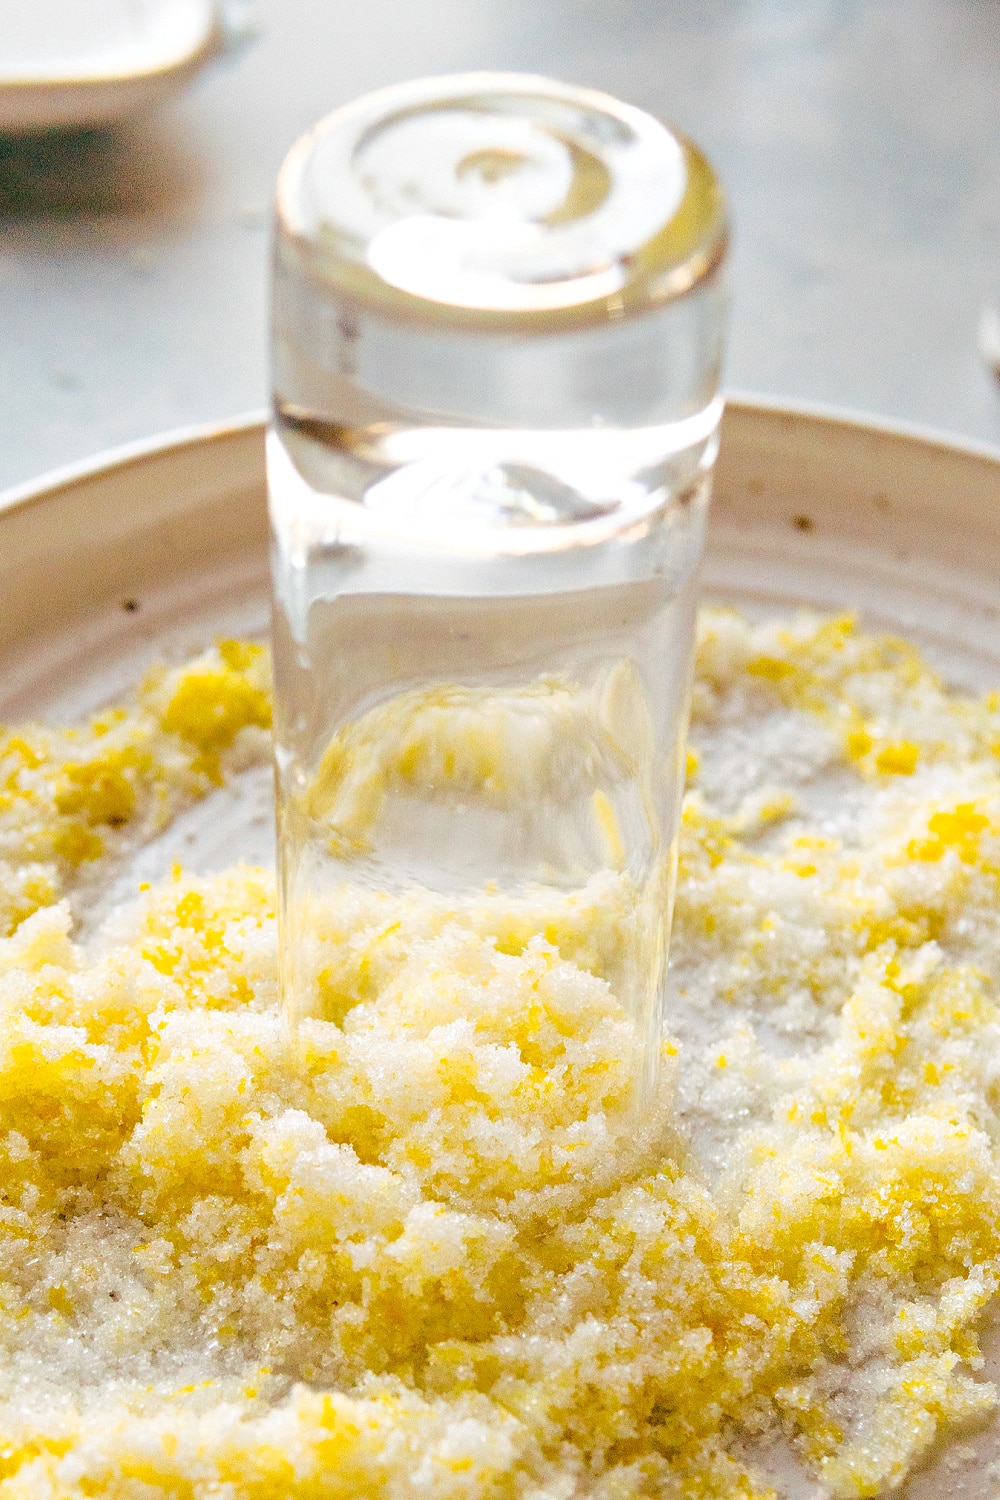 Shot glass rim being dipped into the lemon zest and sugar mixture.